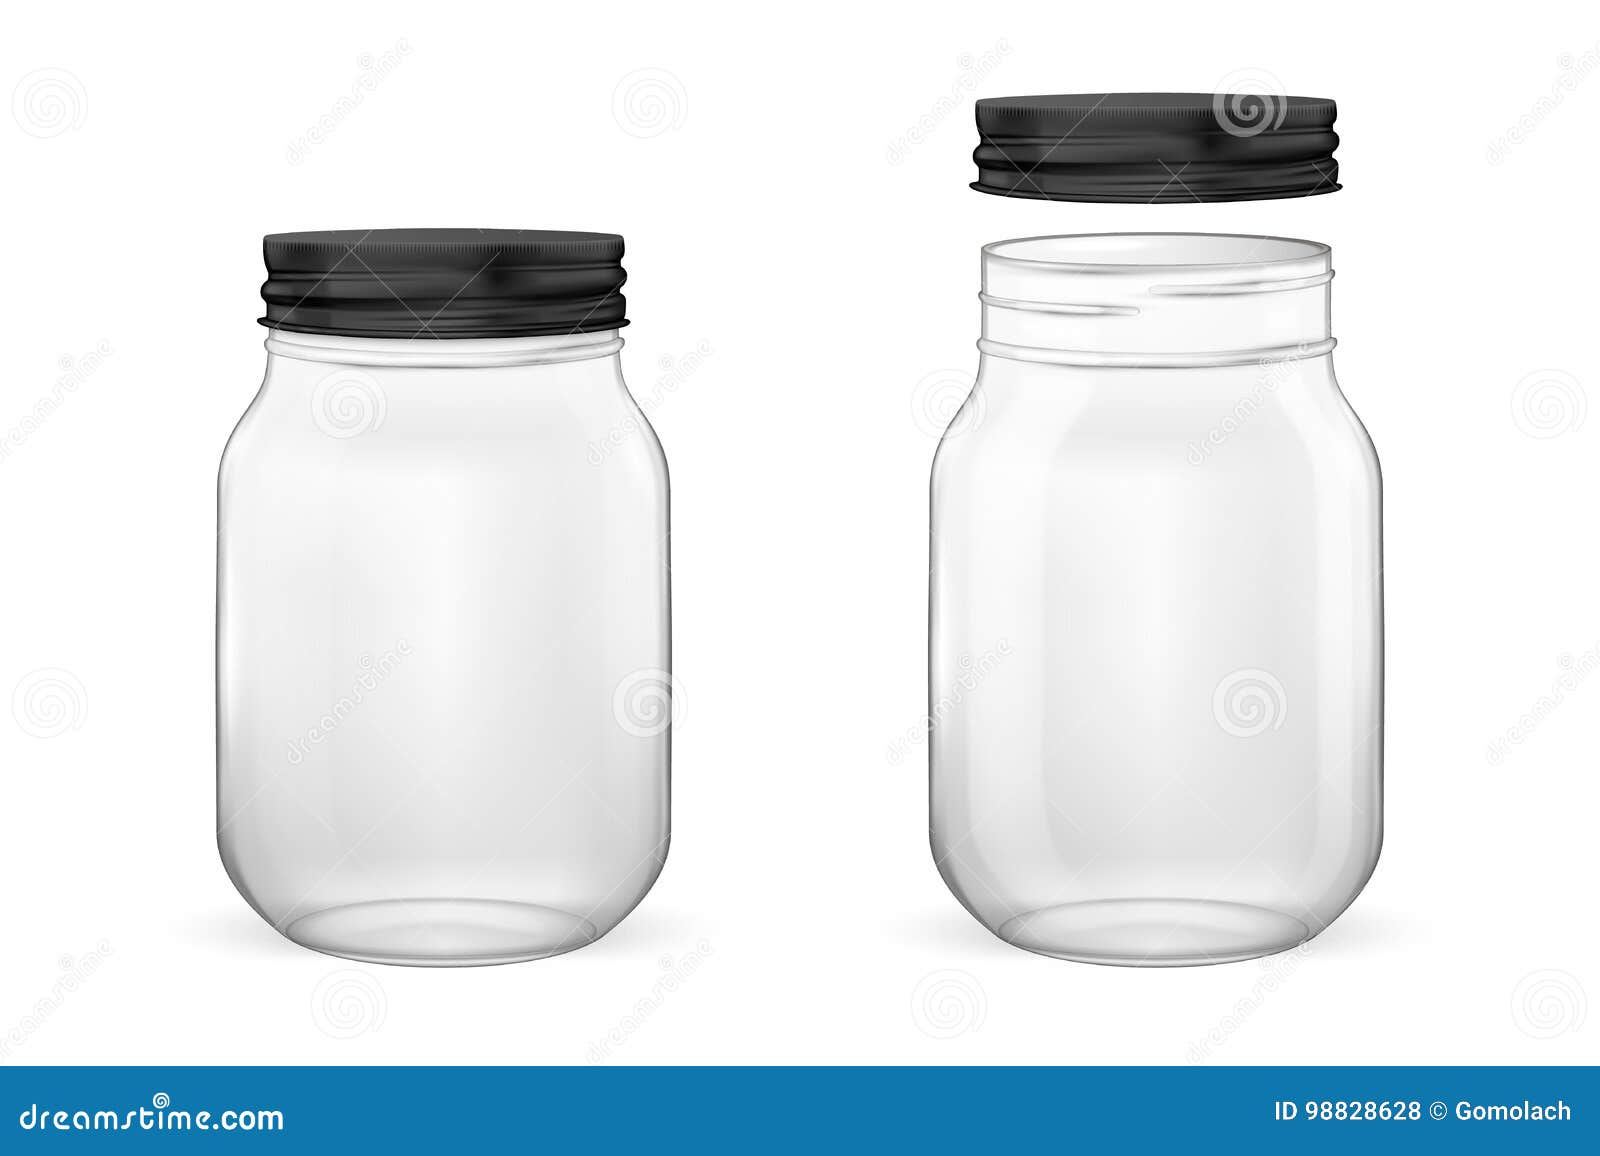 Download Vector Realistic Empty Glass Jar For Canning And Preserving Set With Black Lid Open And Closed Closeup Isolated On Stock Vector Illustration Of Storage Autumn 98828628